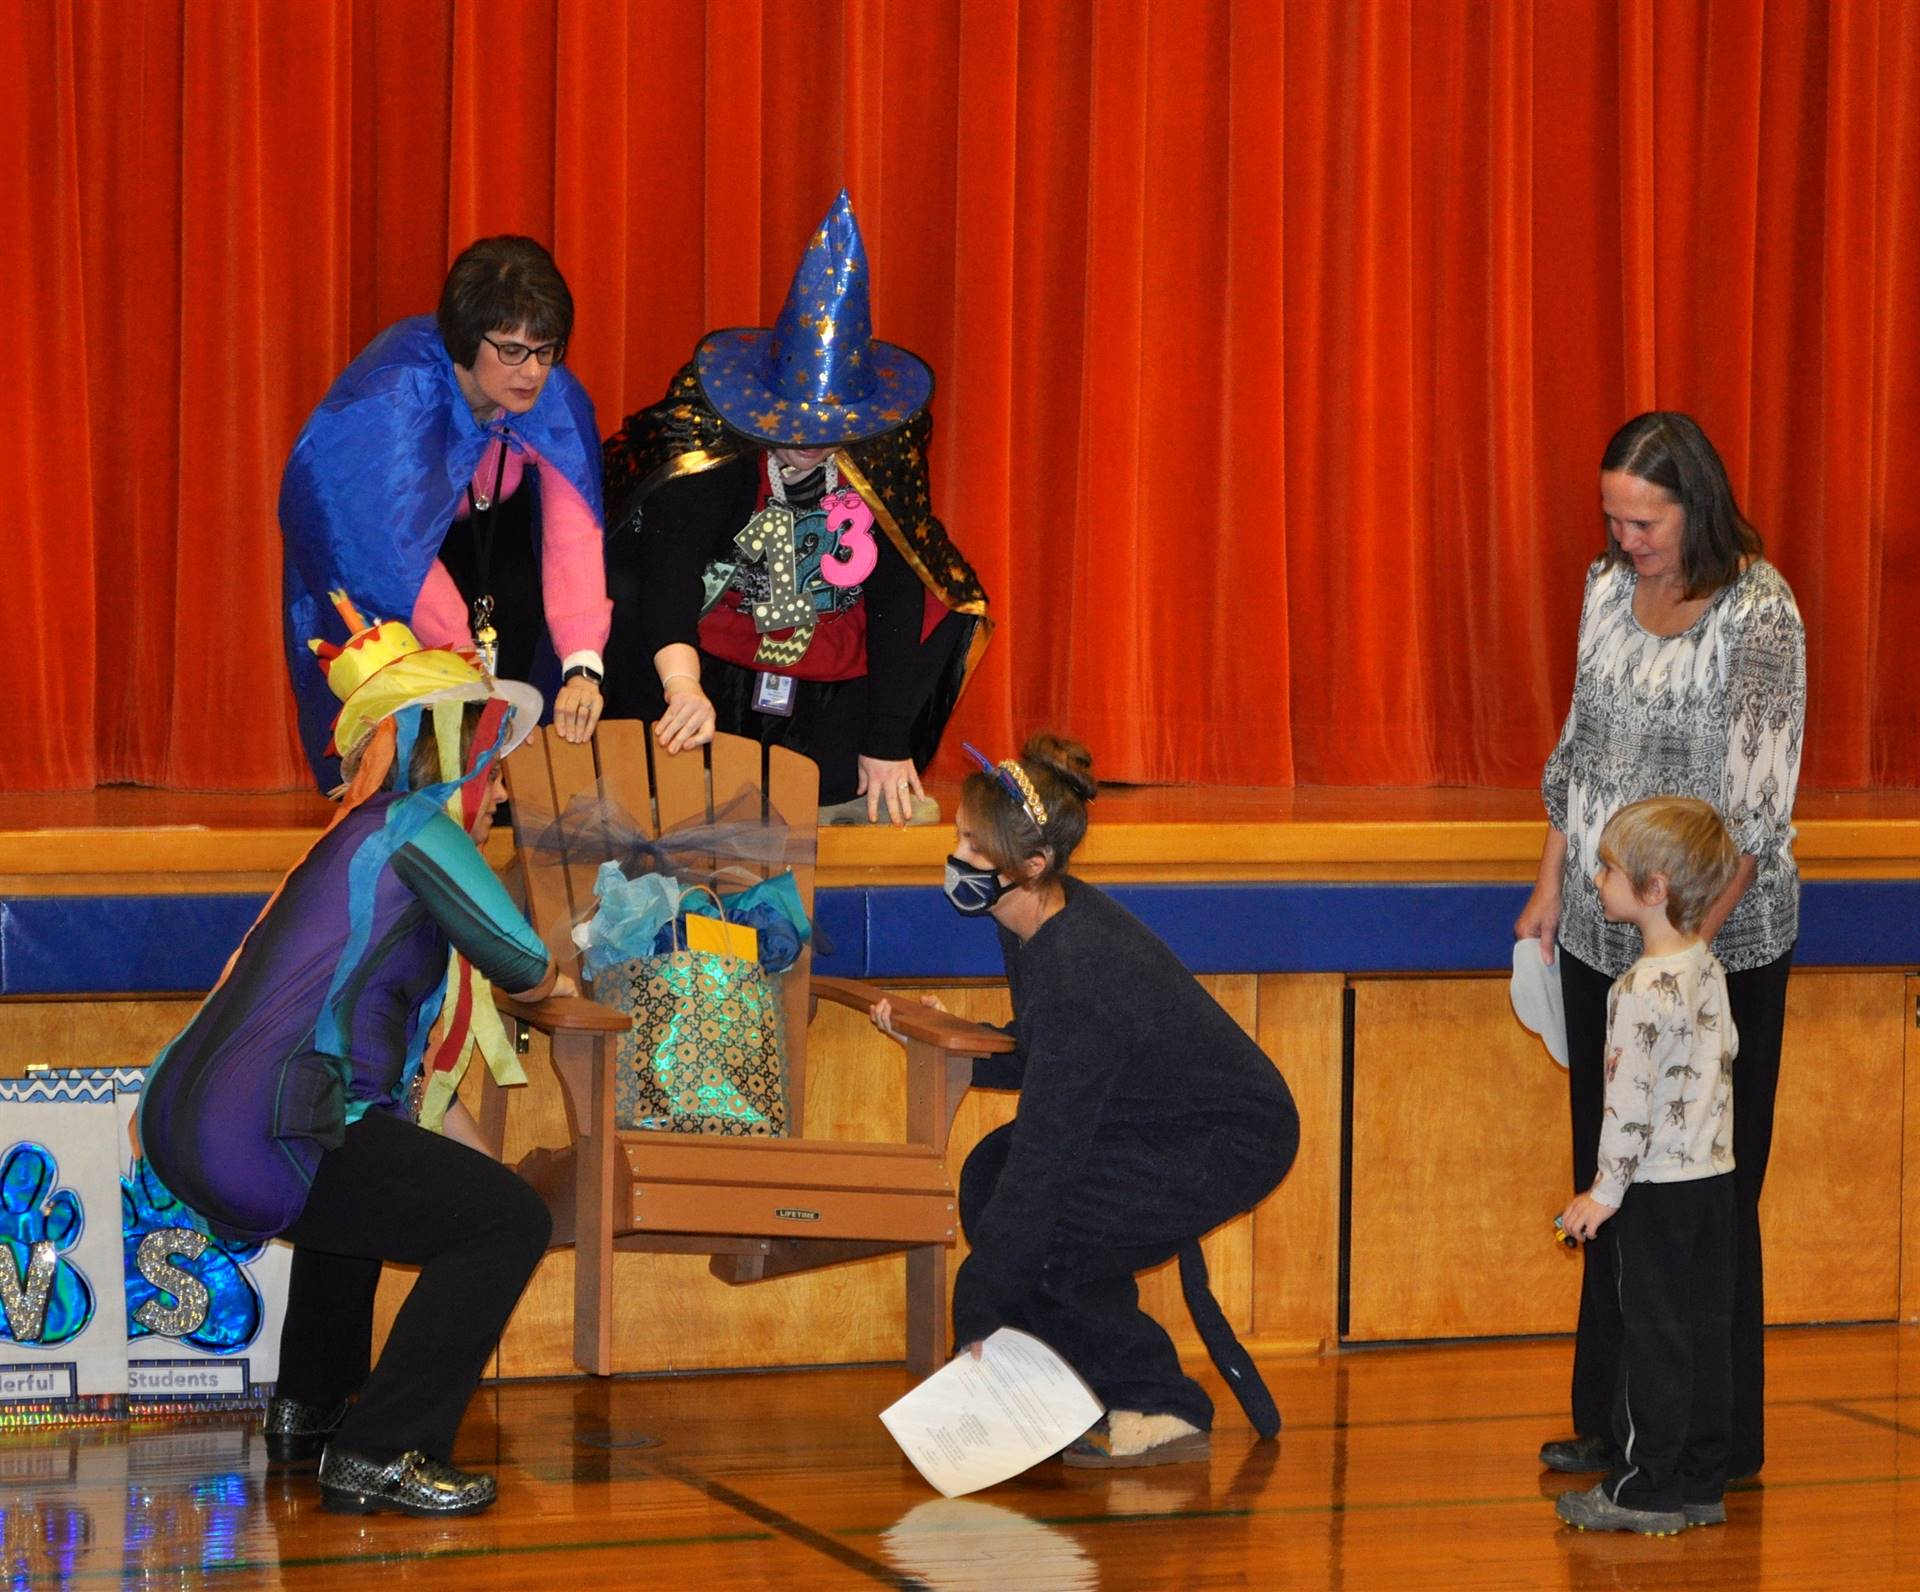 Staff presents a chair to Mrs. Thompson